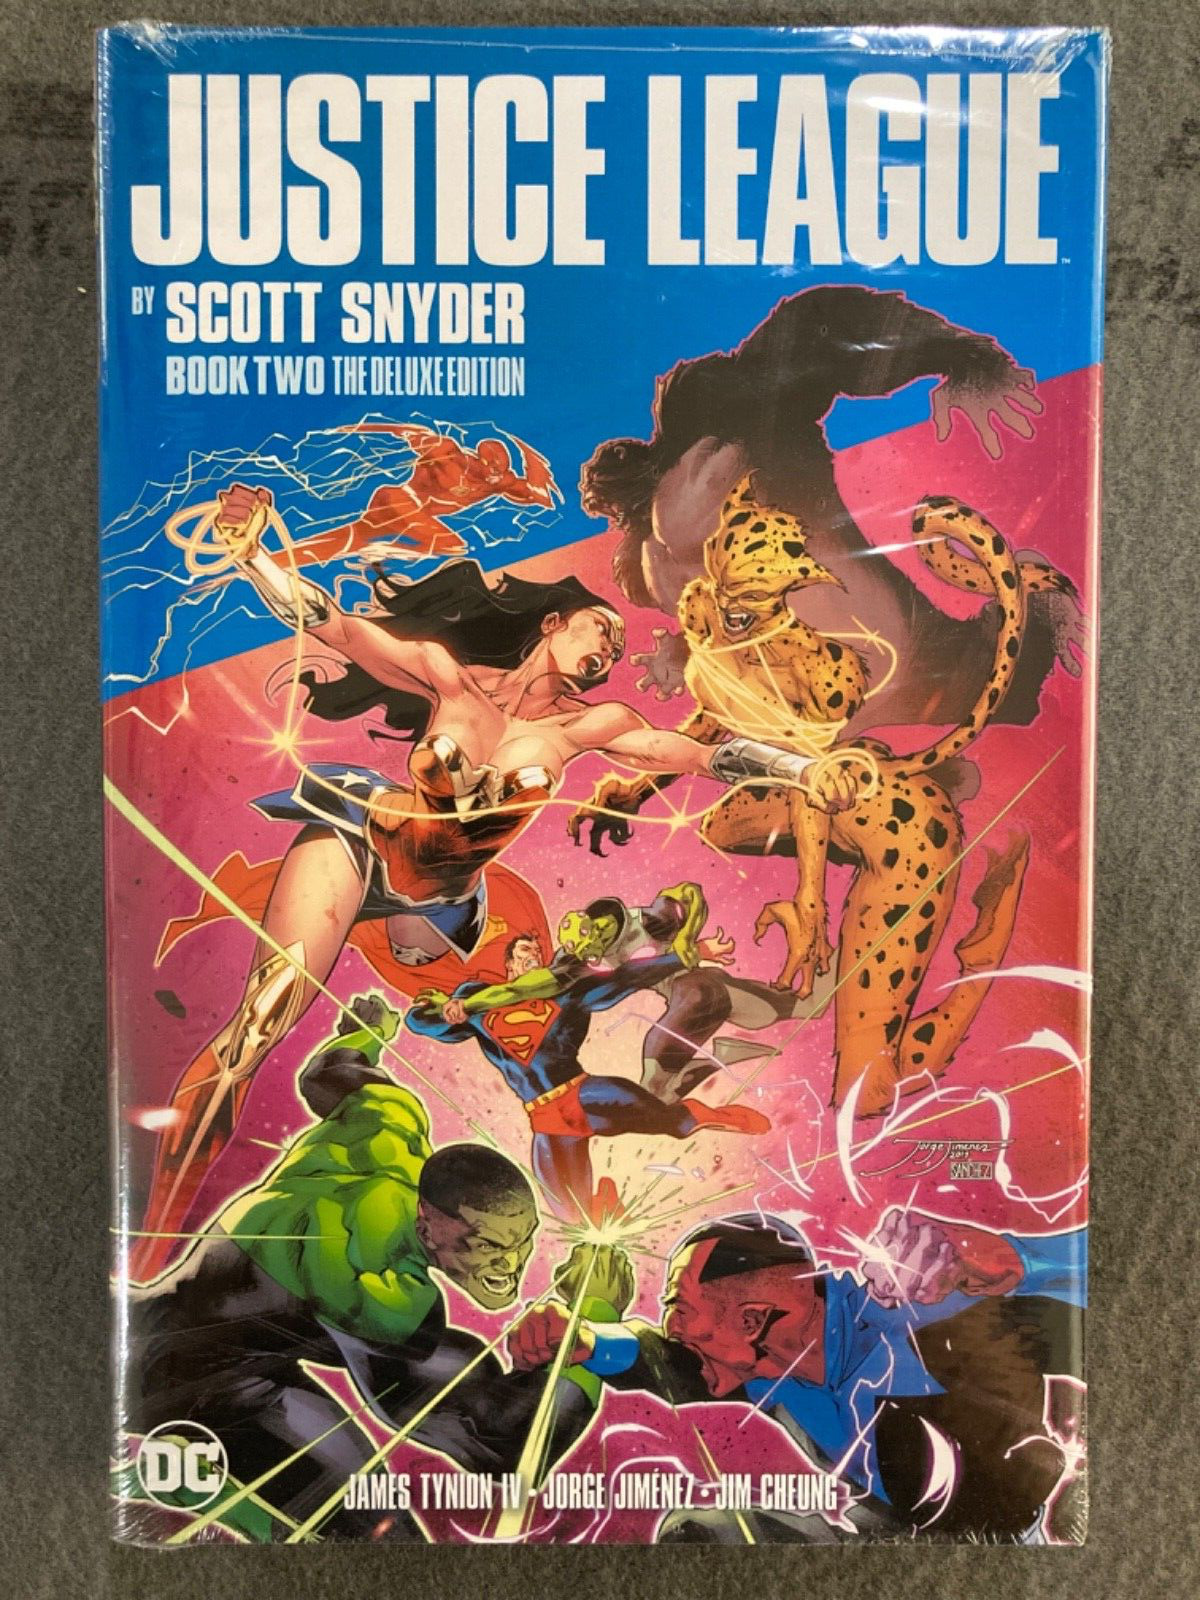 JUSTICE LEAGUE by Scott Snyder: Book 2, Deluxe Edition (Hardcover, New/Sealed)